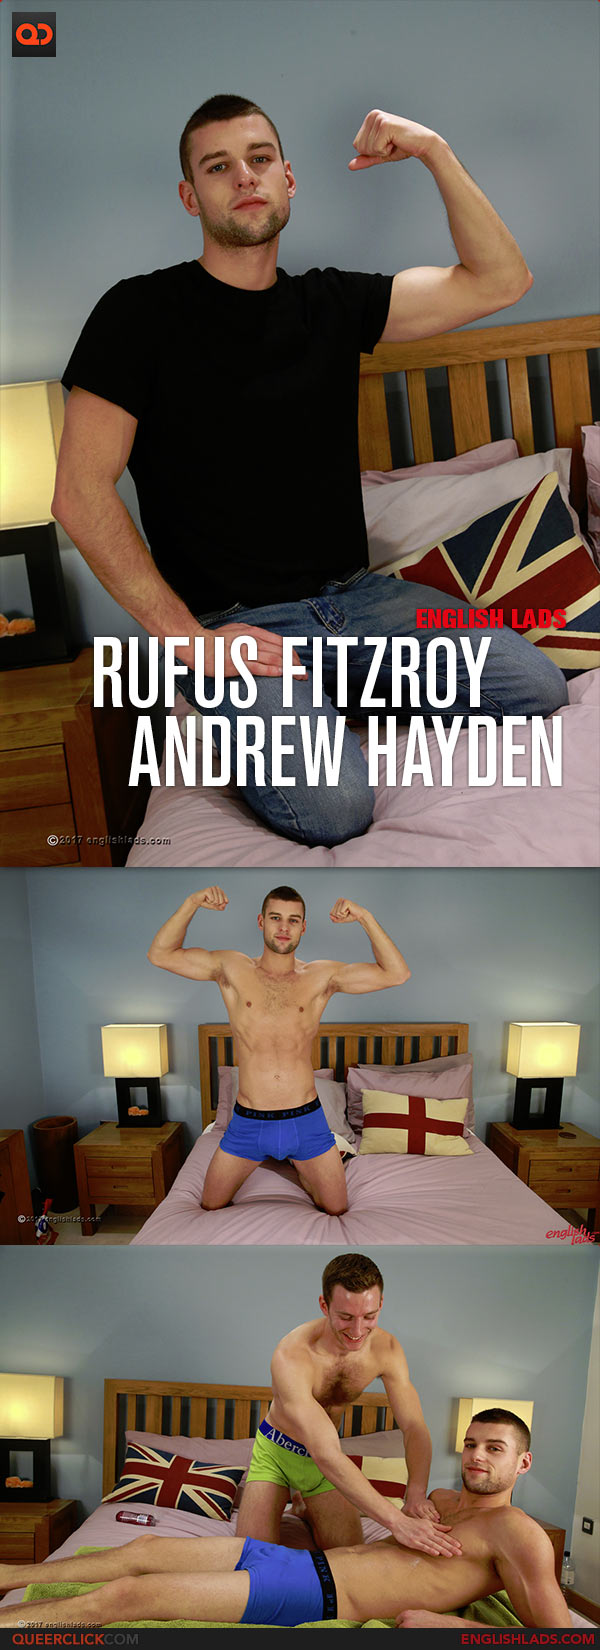 English Lads: Straight Rufus Fitzroy gets his First Man Handling by Andrew Hayden